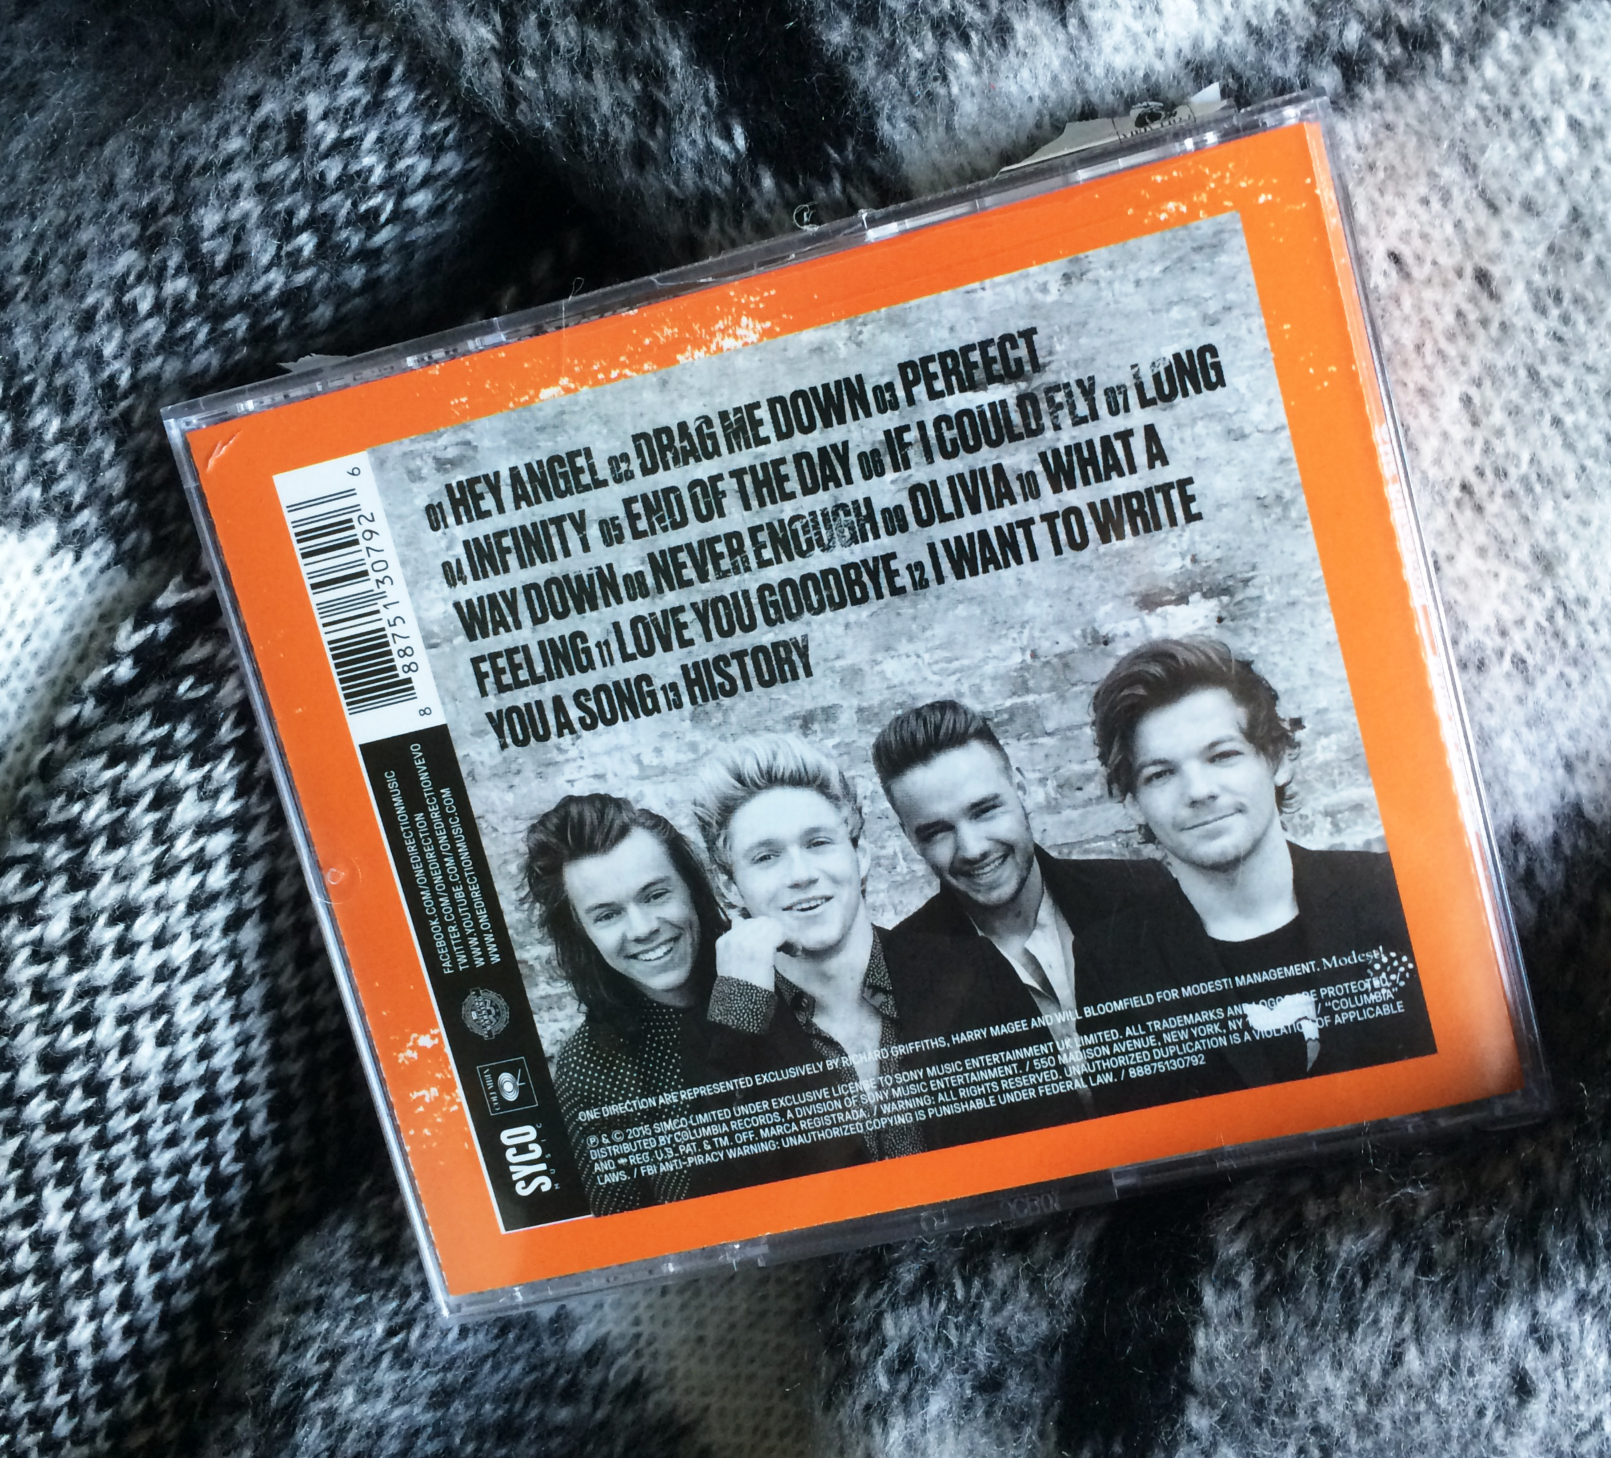 One Direction Made In The A.M. (Deluxe) Track By Track Review // eyeliner wings and pretty things